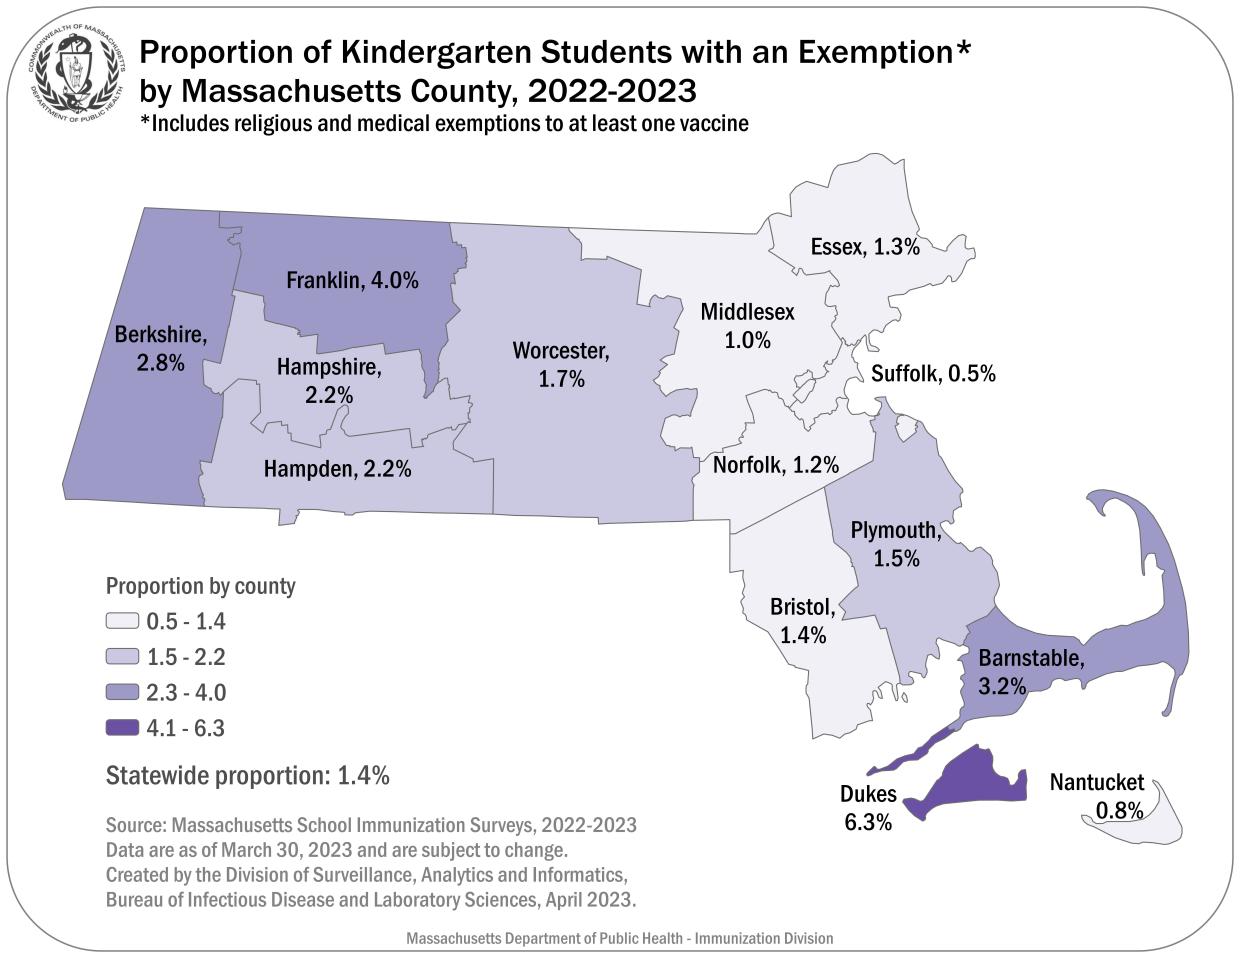 This map shows the proportion of Kindergarten Students by Massachusetts County with an Exemption, 2022-2023. These are religious and medical exemptions combined. These data are current as of March 30, 2023 and are subject to change. The source of these data is via the Massachusetts School Immunization Surveys 2022-2023. State average 1.4% Barnstable 3.2% Berkshire 2.8% Bristol 1.4% Dukes 6.3% Hampden 2.2% Hampshire 2.2% Essex 1.3% Franklin 4.0% Middlesex 1.0% Nantucket 0.8% Norfolk 1.2% Plymouth: 1.5% Suffolk 0.5% Worcester 1.7%